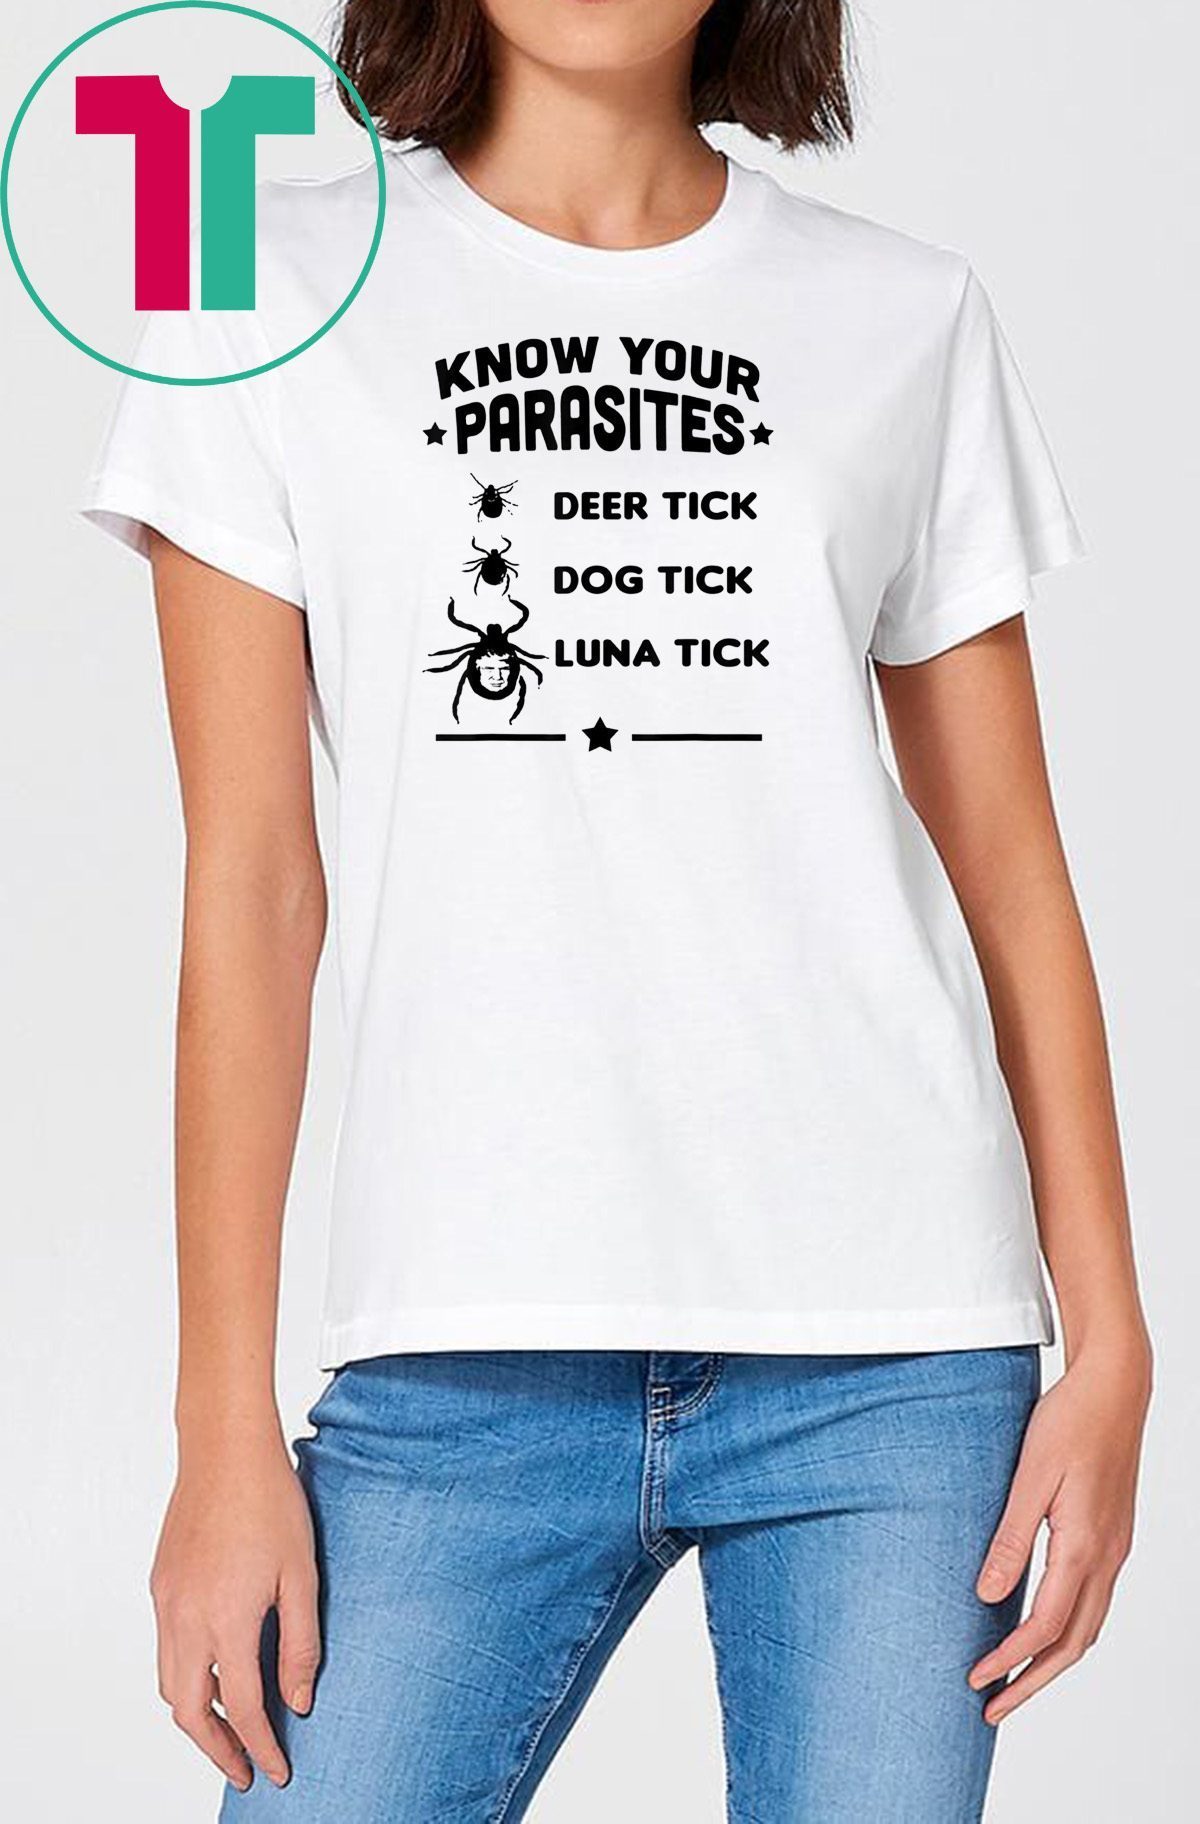 Know Your Parasites T-shirt RESIST Shirt Funny Gift - ShirtsMango Office